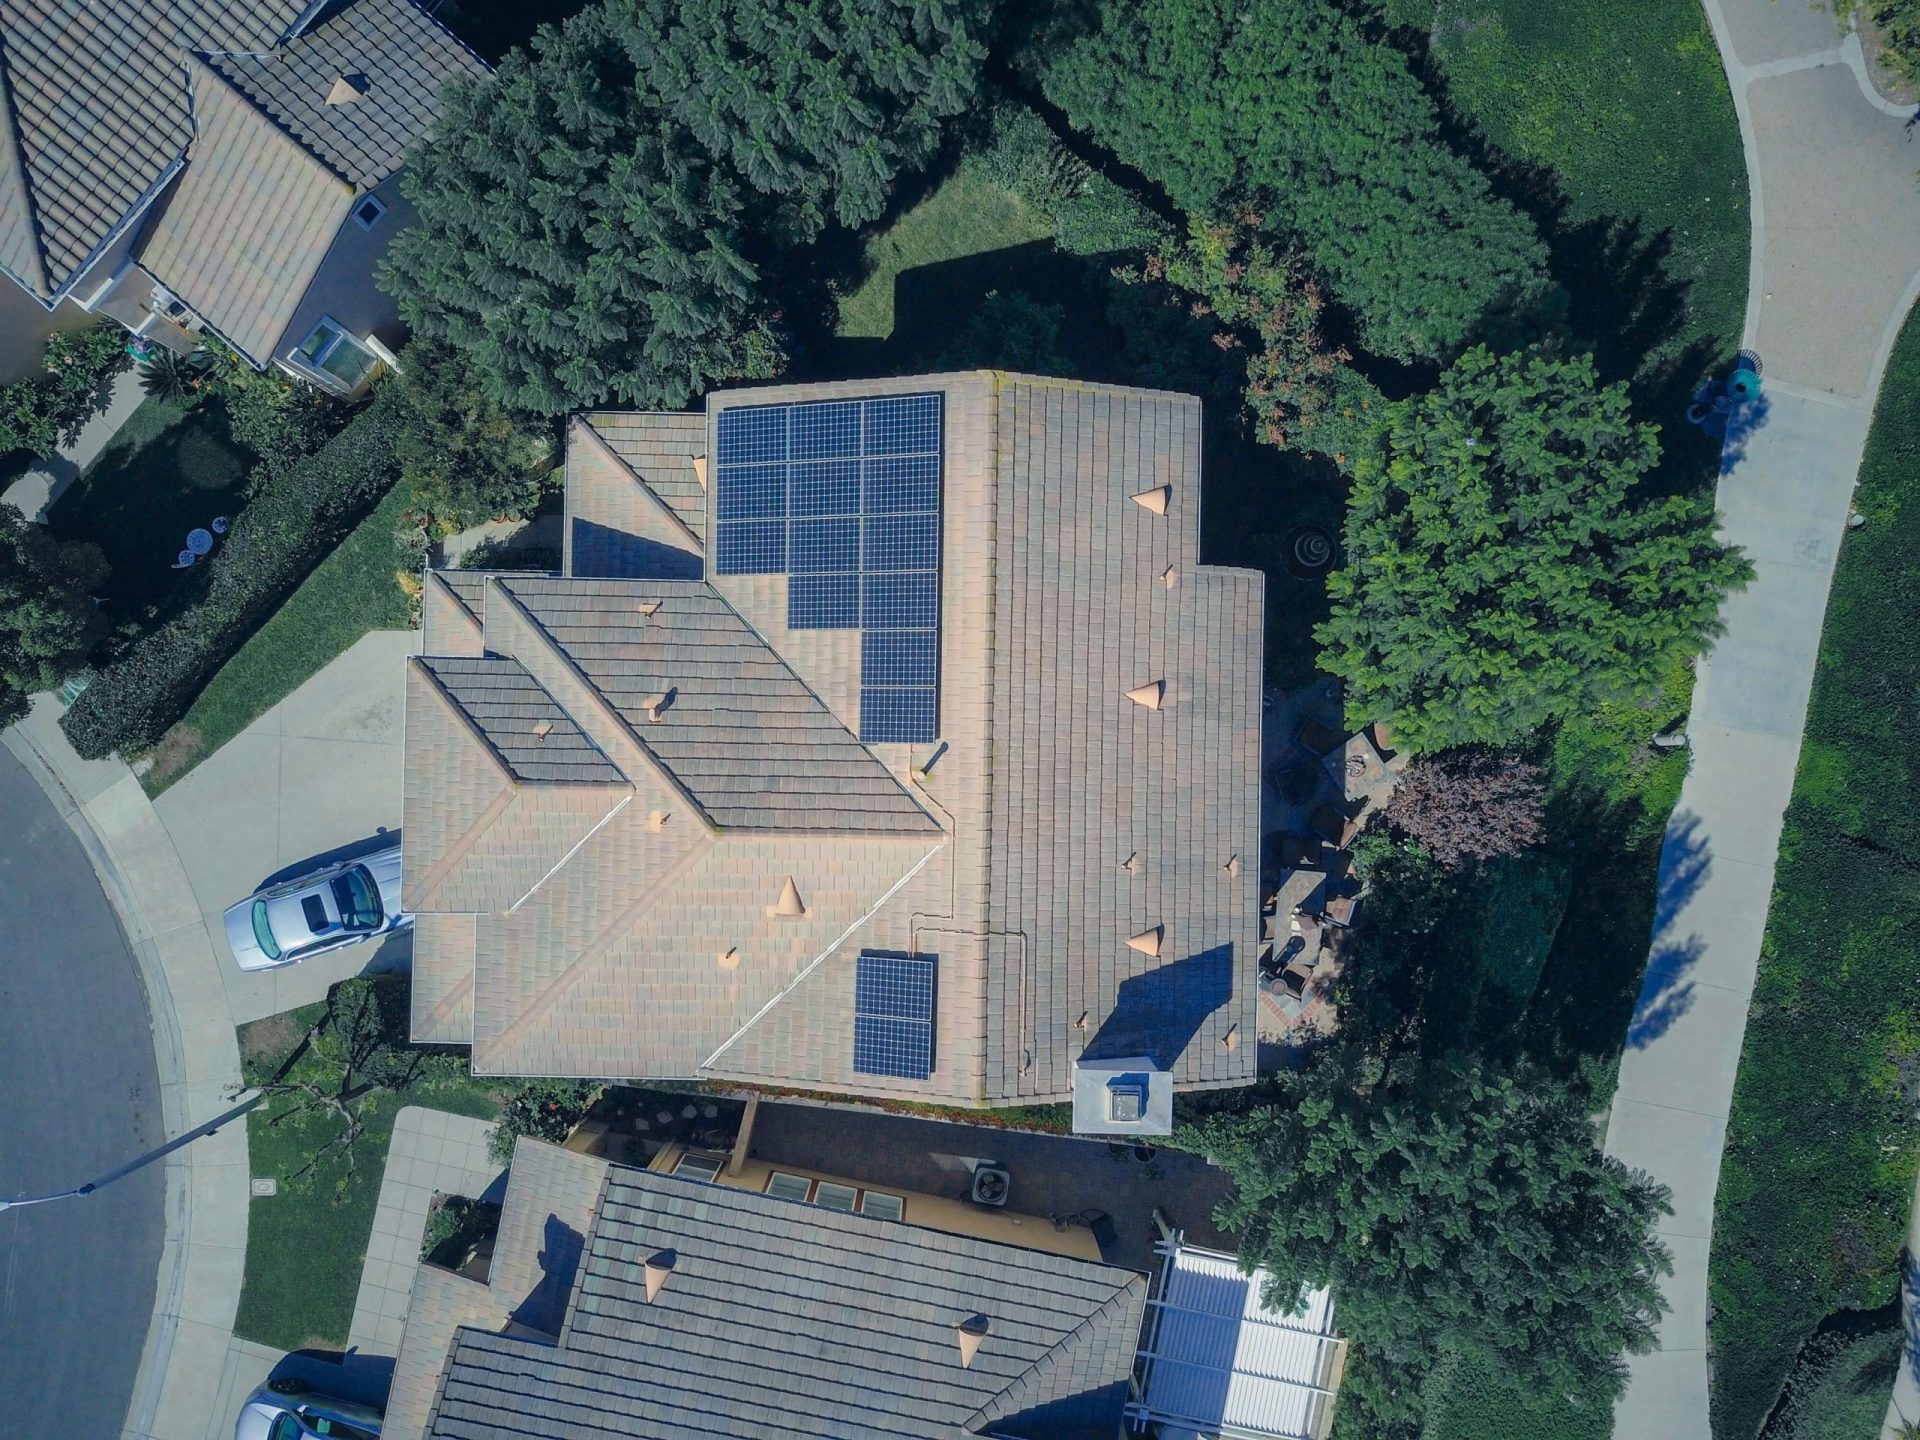 aerial look at a home with solar panels